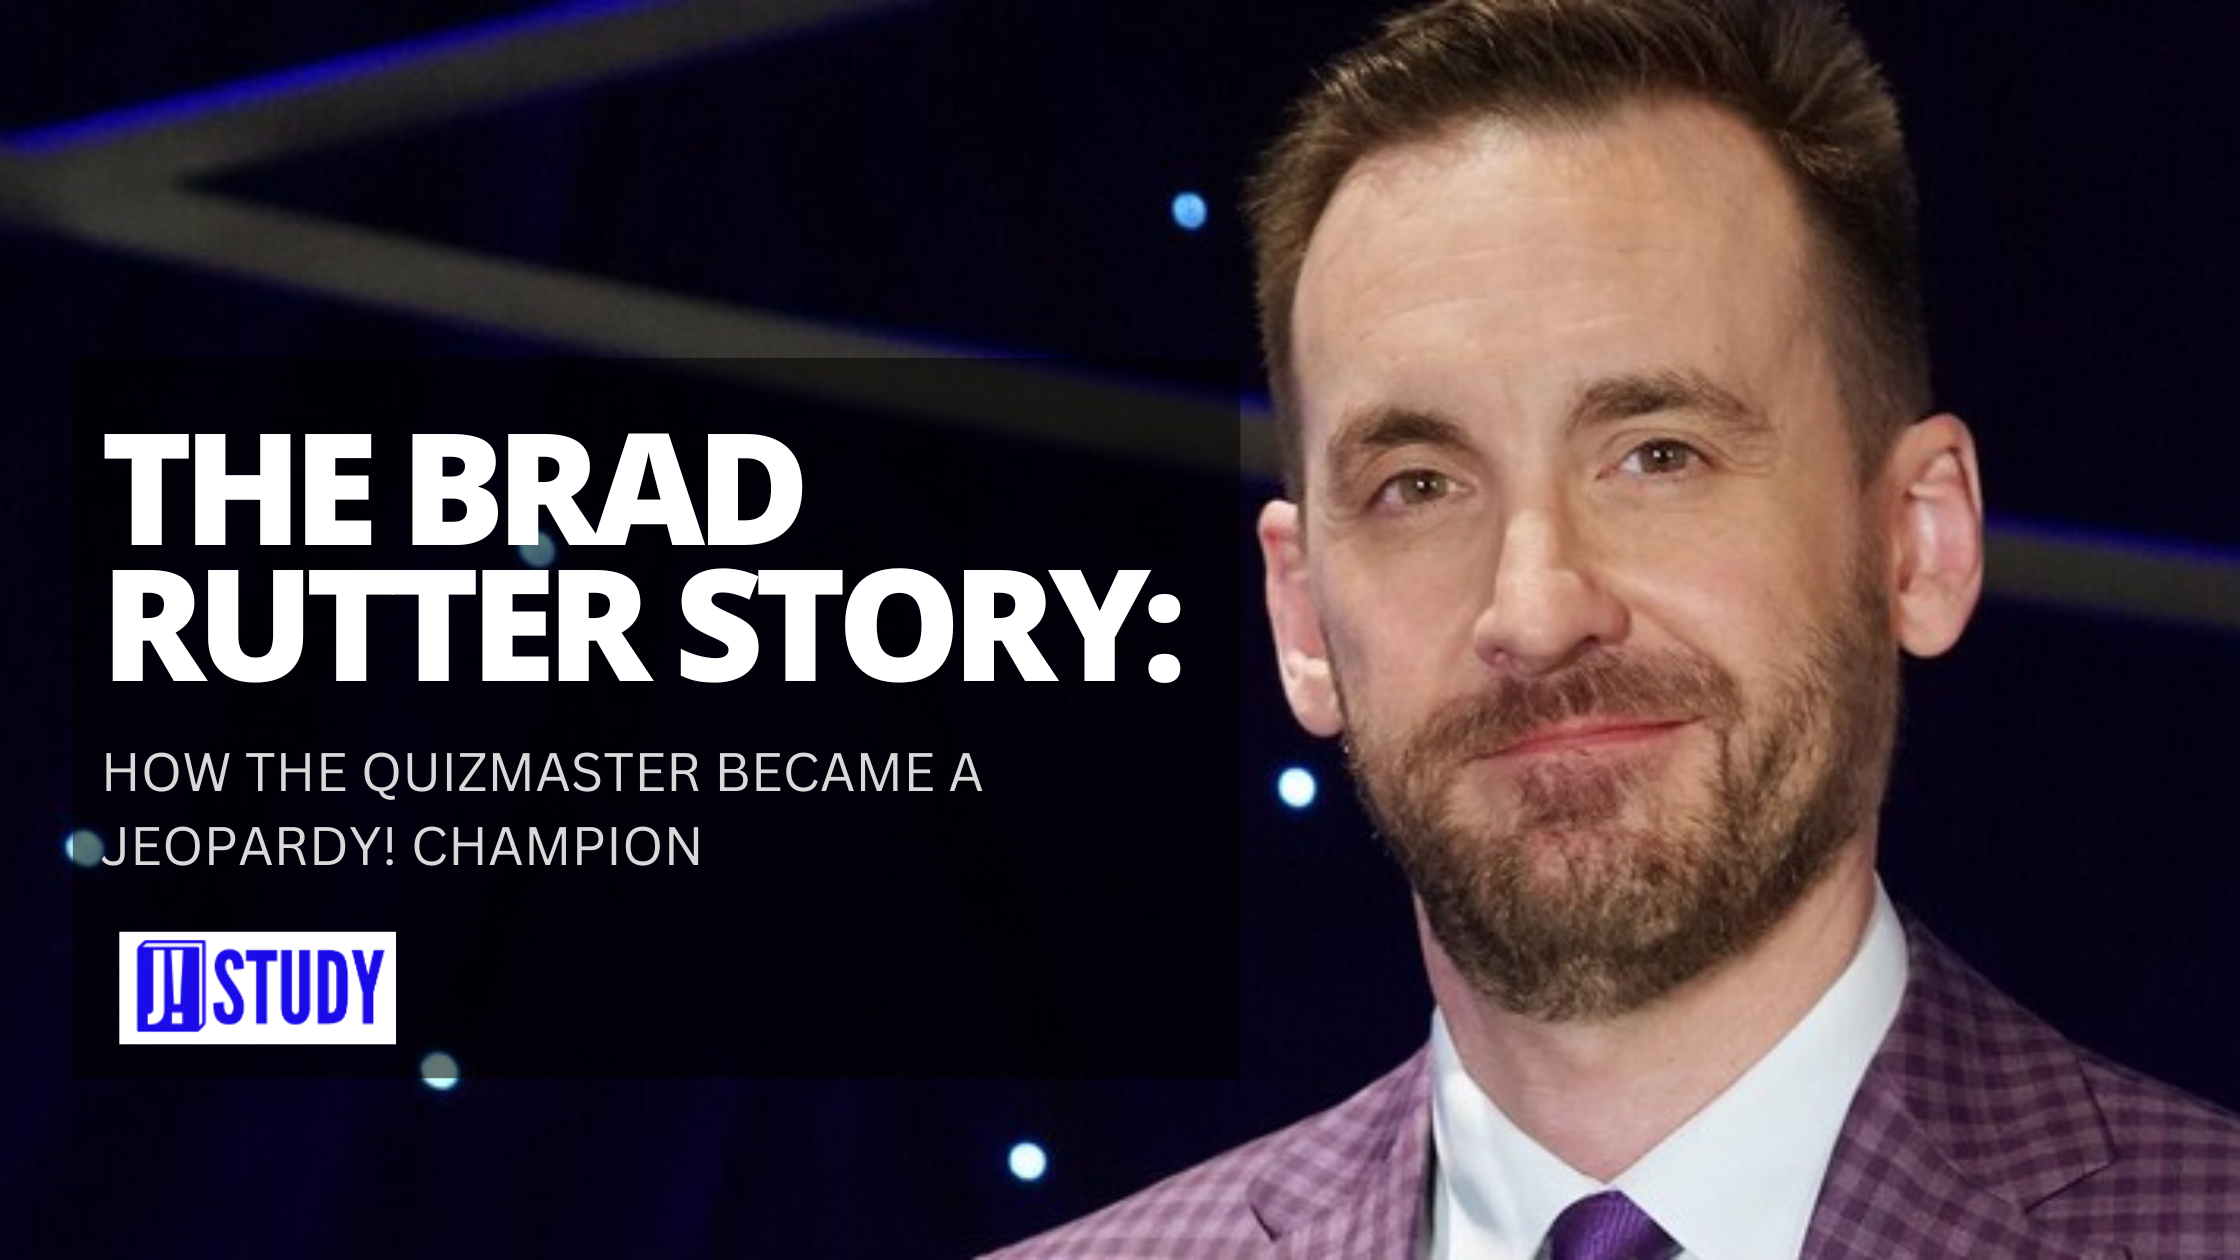 The Brad Rutter Story: How the Quizmaster Became a Jeopardy! Champion